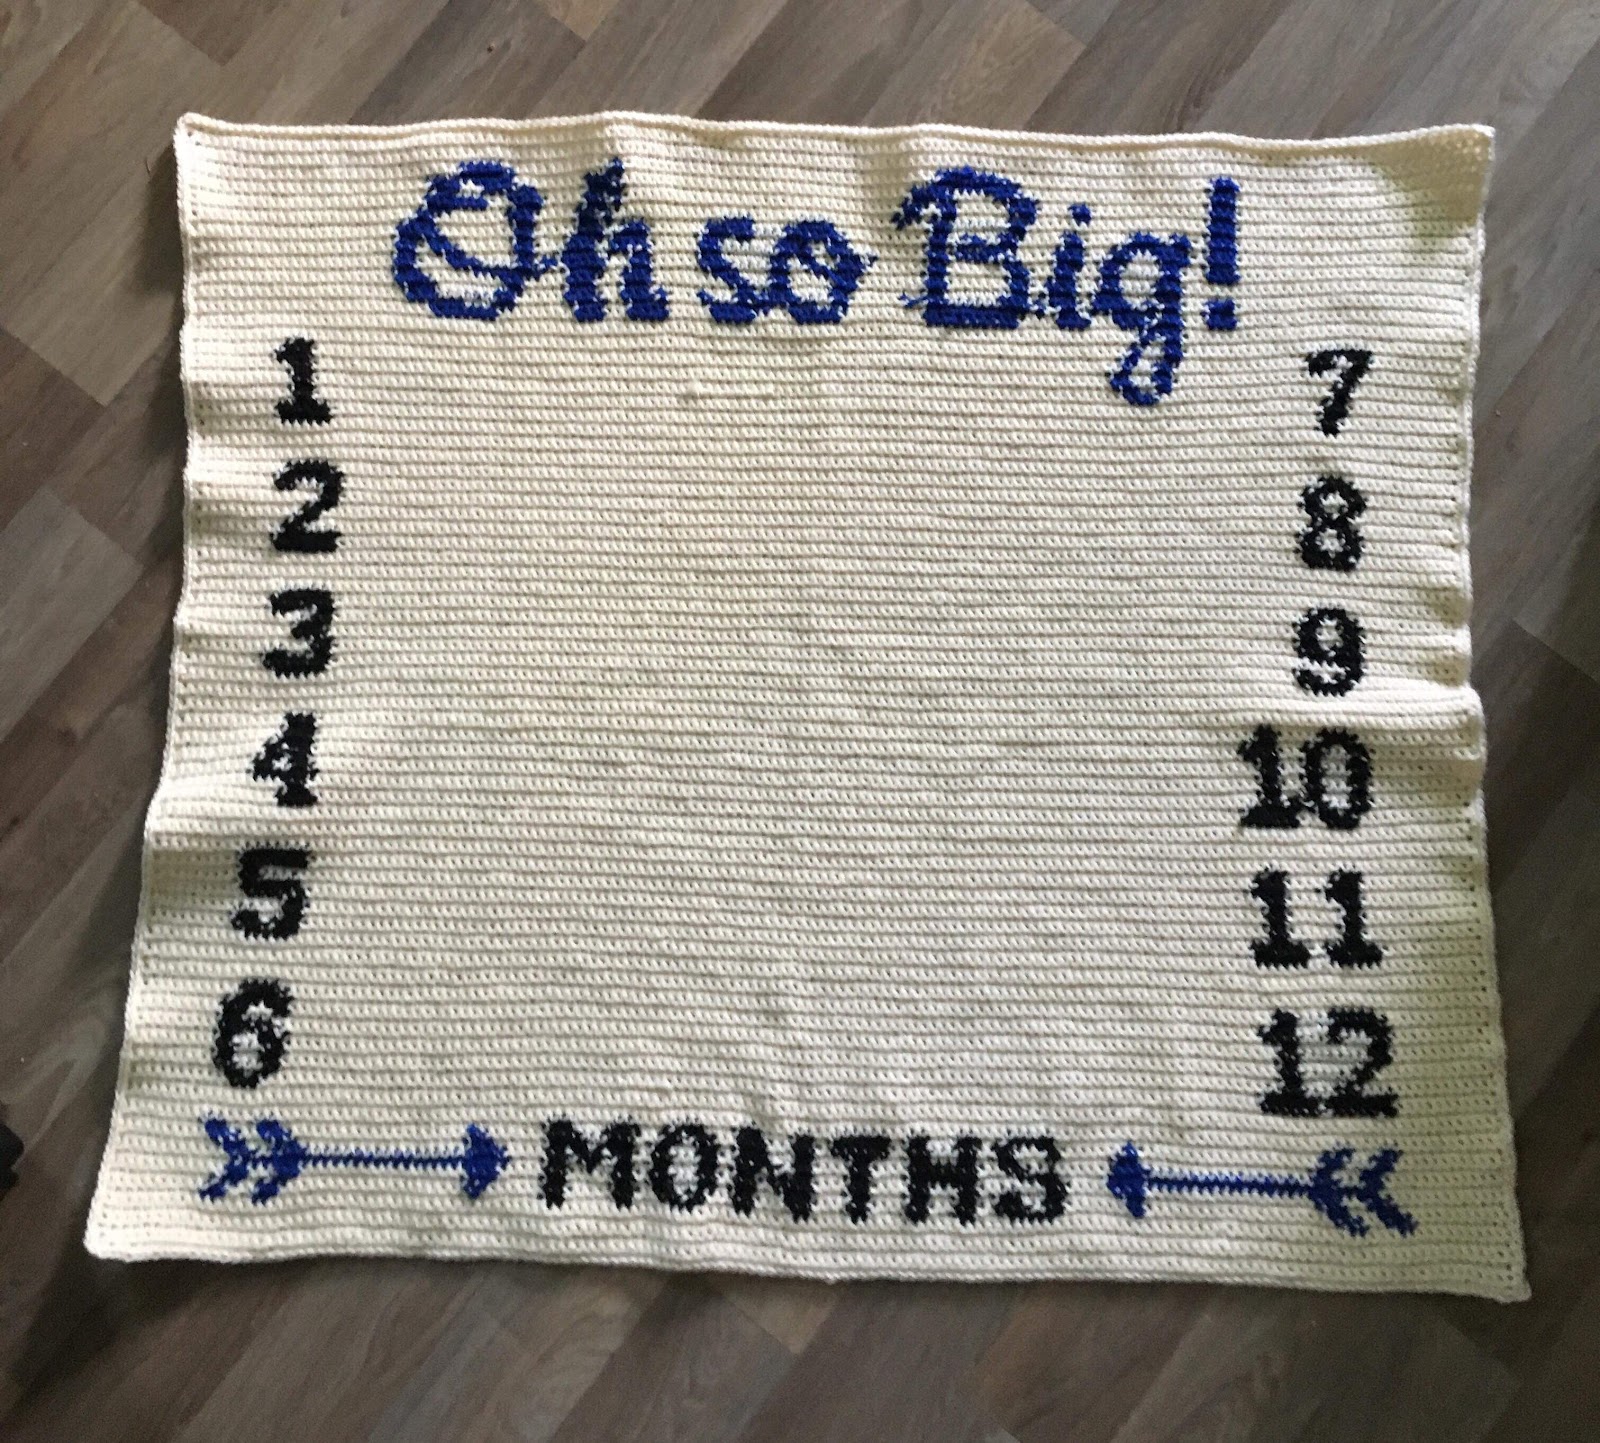 finished square oh so big baby growth blanket milestone first year crochet graph 